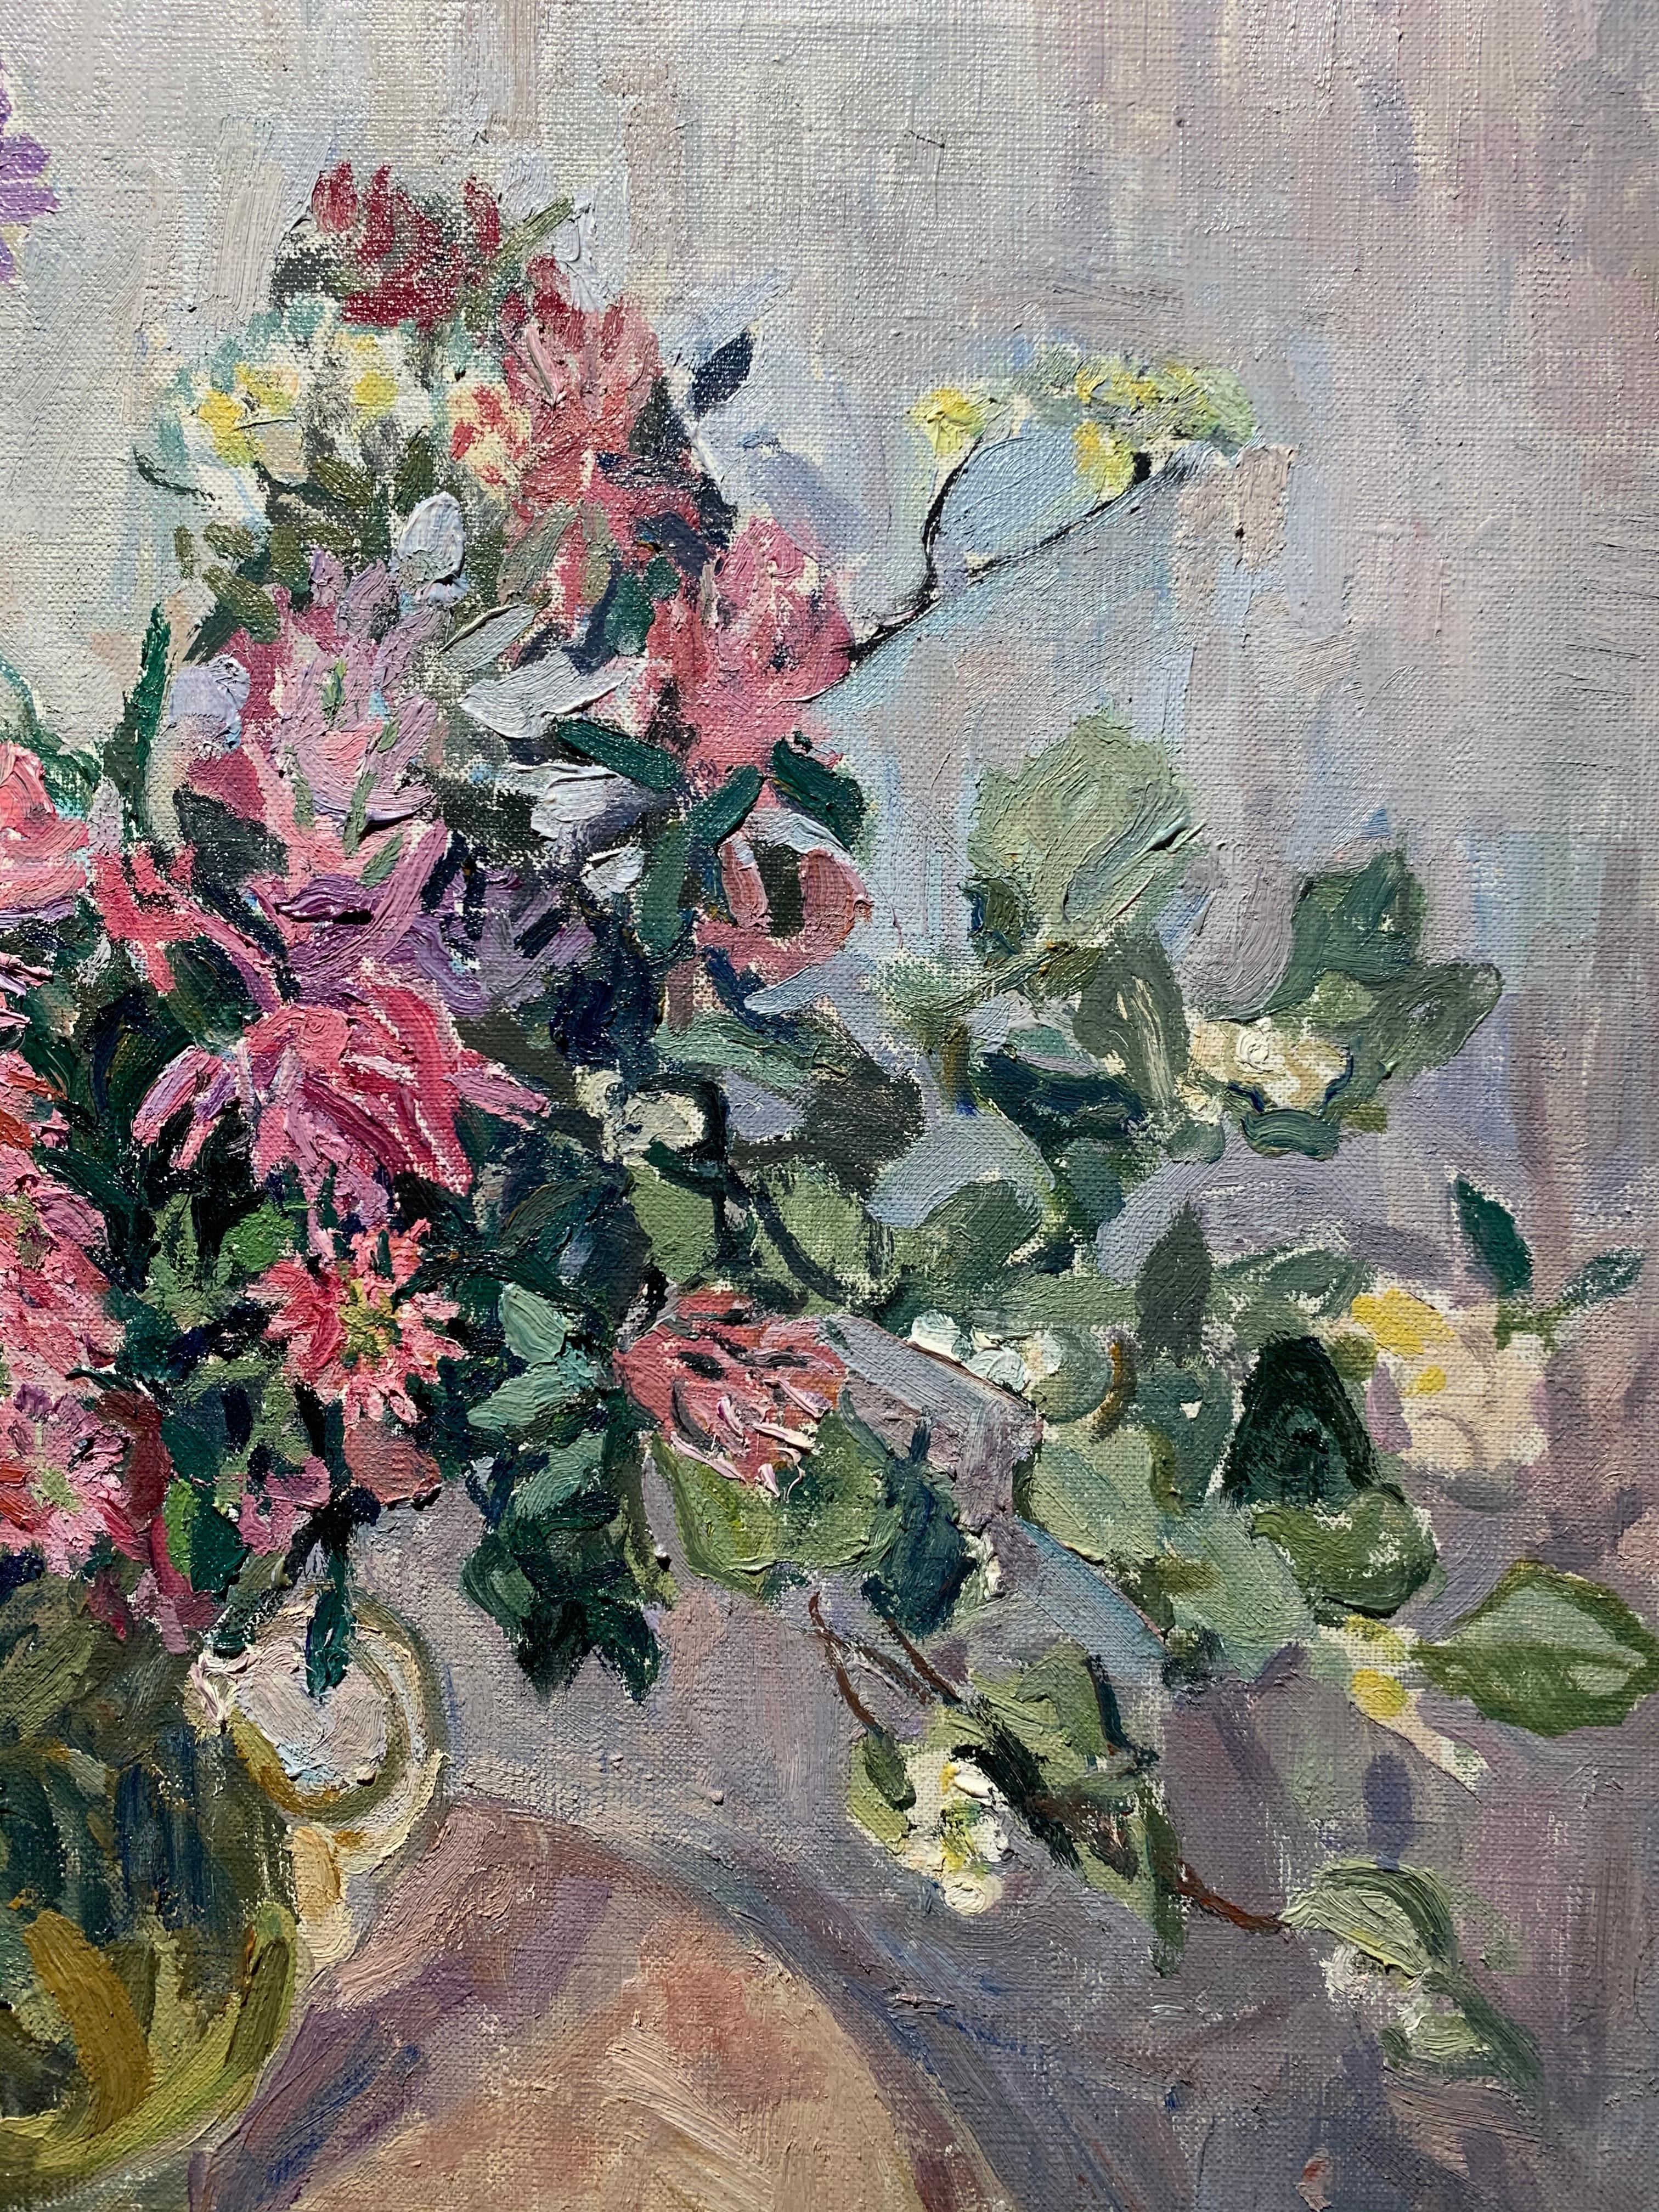 Flowers,Rose,Pot, purple,russian artist,woman artist

MAYA KOPITZEVA    (Gagra, Georgia, 1924 - 2005)

Maya kopitzeva’s works have been acquired by the Russian Ministry of Culture, by the Foundation for the Russian Culture, by various collectors in